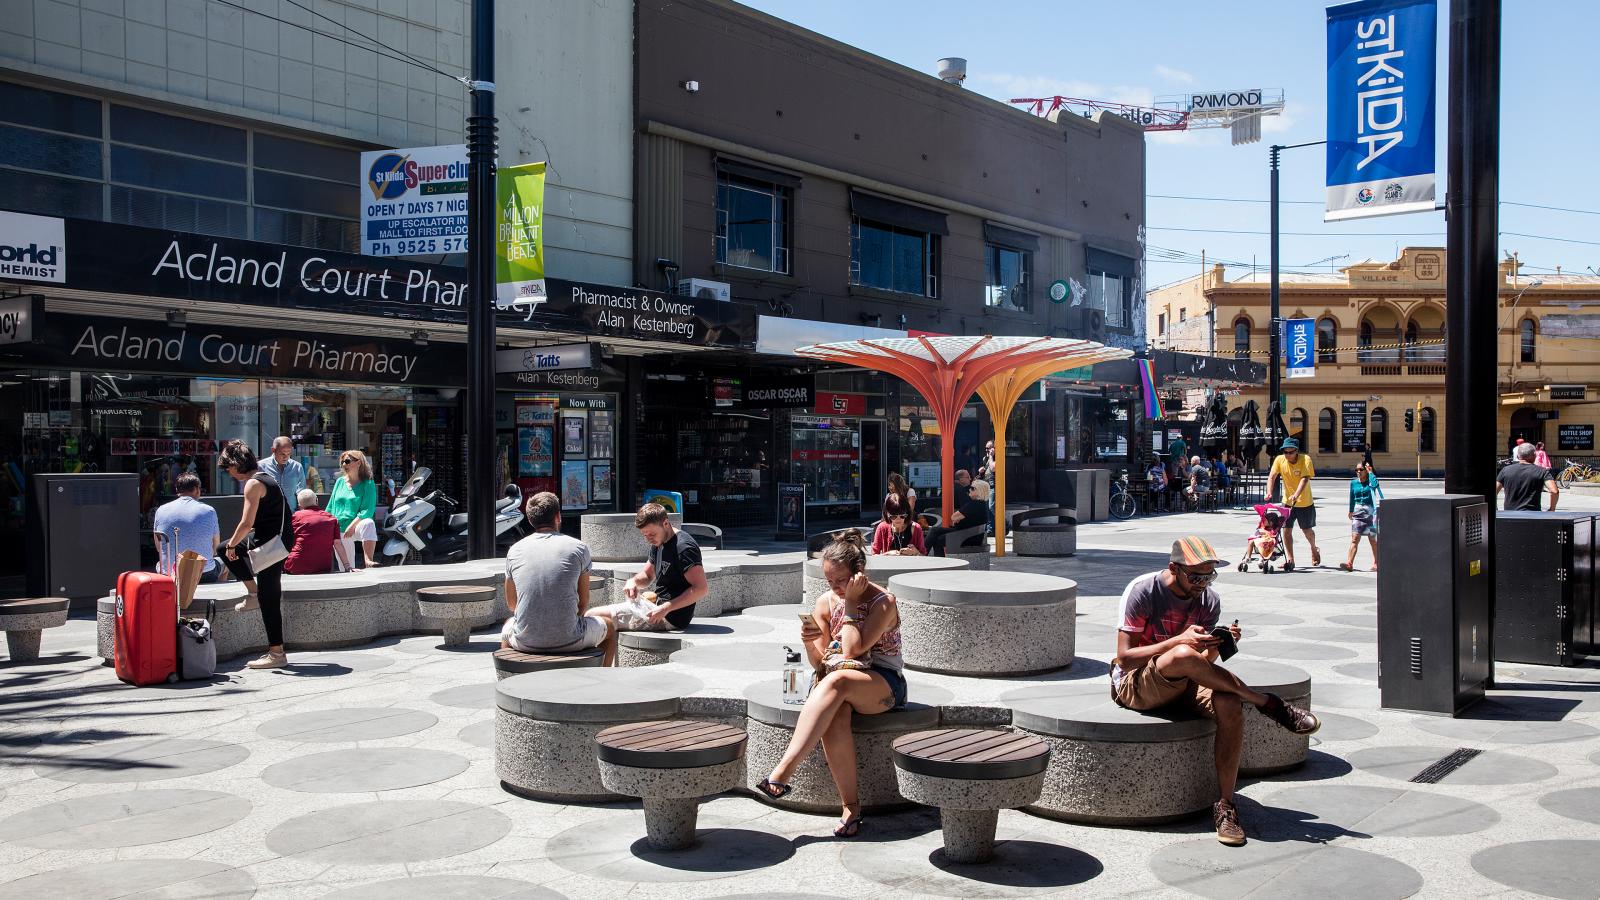 A busy urban plaza on Acland Street features people sitting and socializing on modern circular benches. The backdrop includes various shops, a pharmacy, and a distinctive mushroom-shaped canopy over one bench. Pedestrians move through the area, some with luggage or shopping bags.